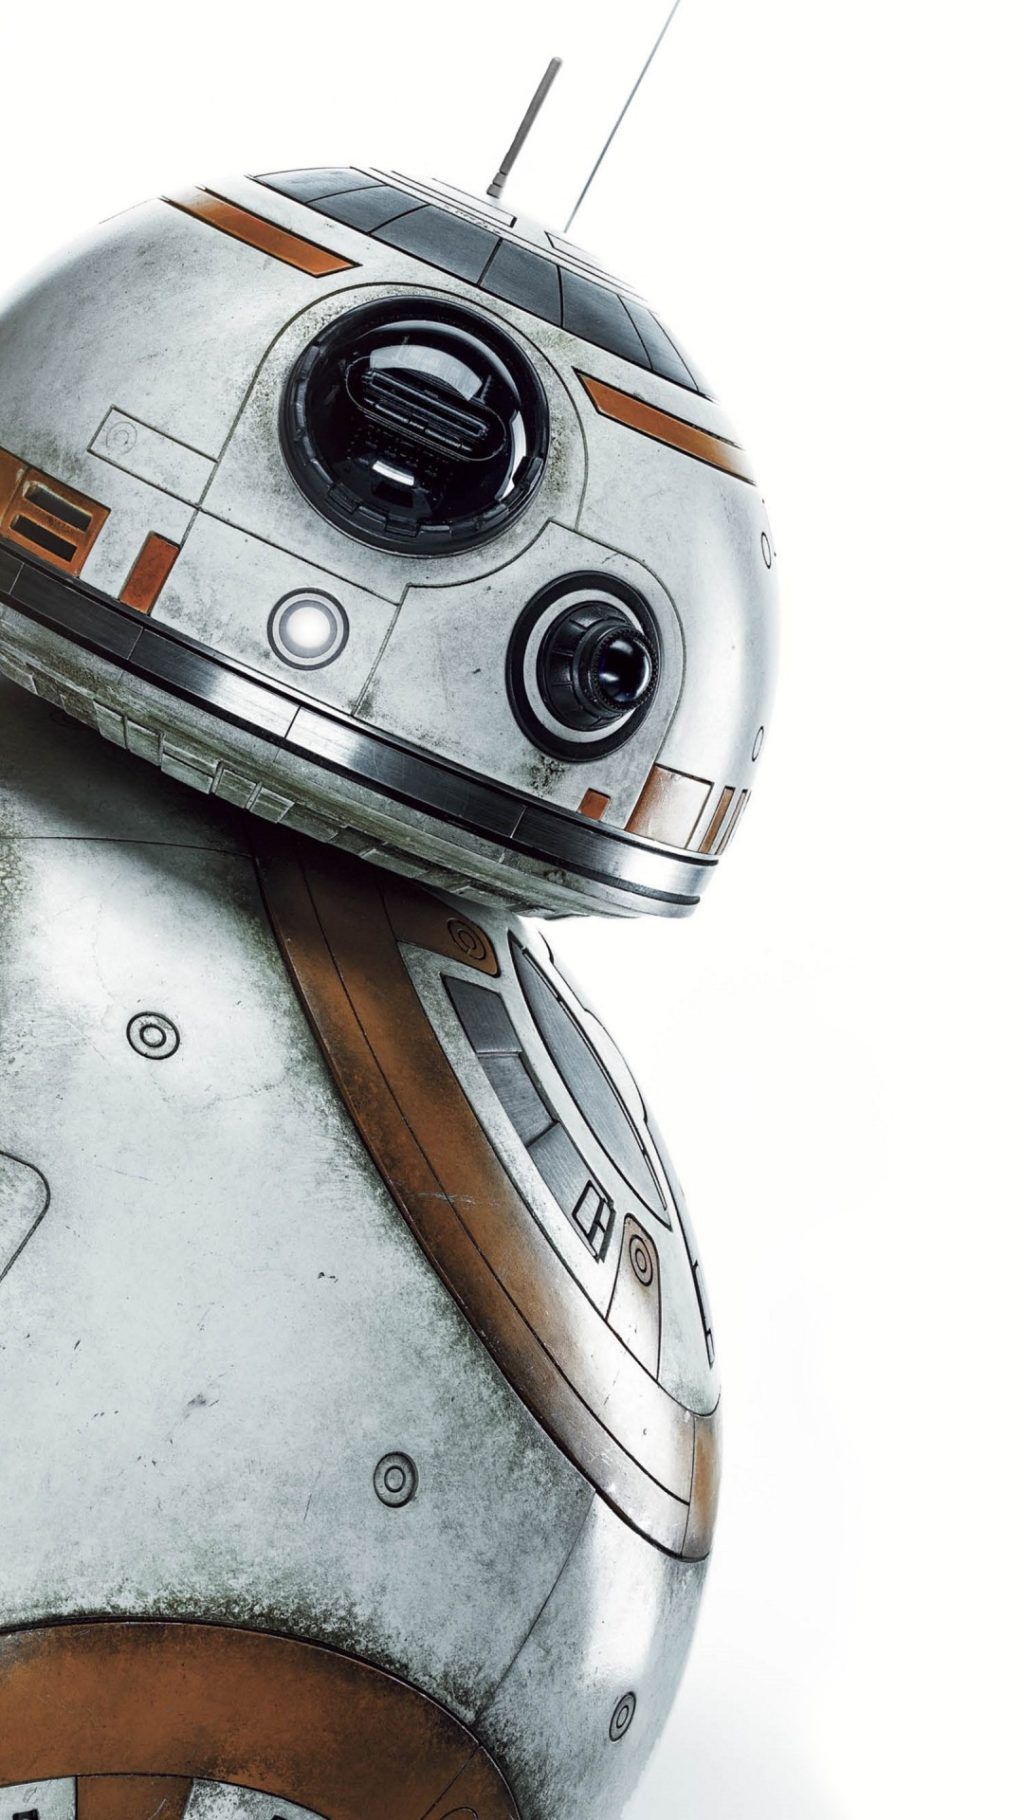 Star Wars BB8 Wallpaper (more in comments) iphonehacks